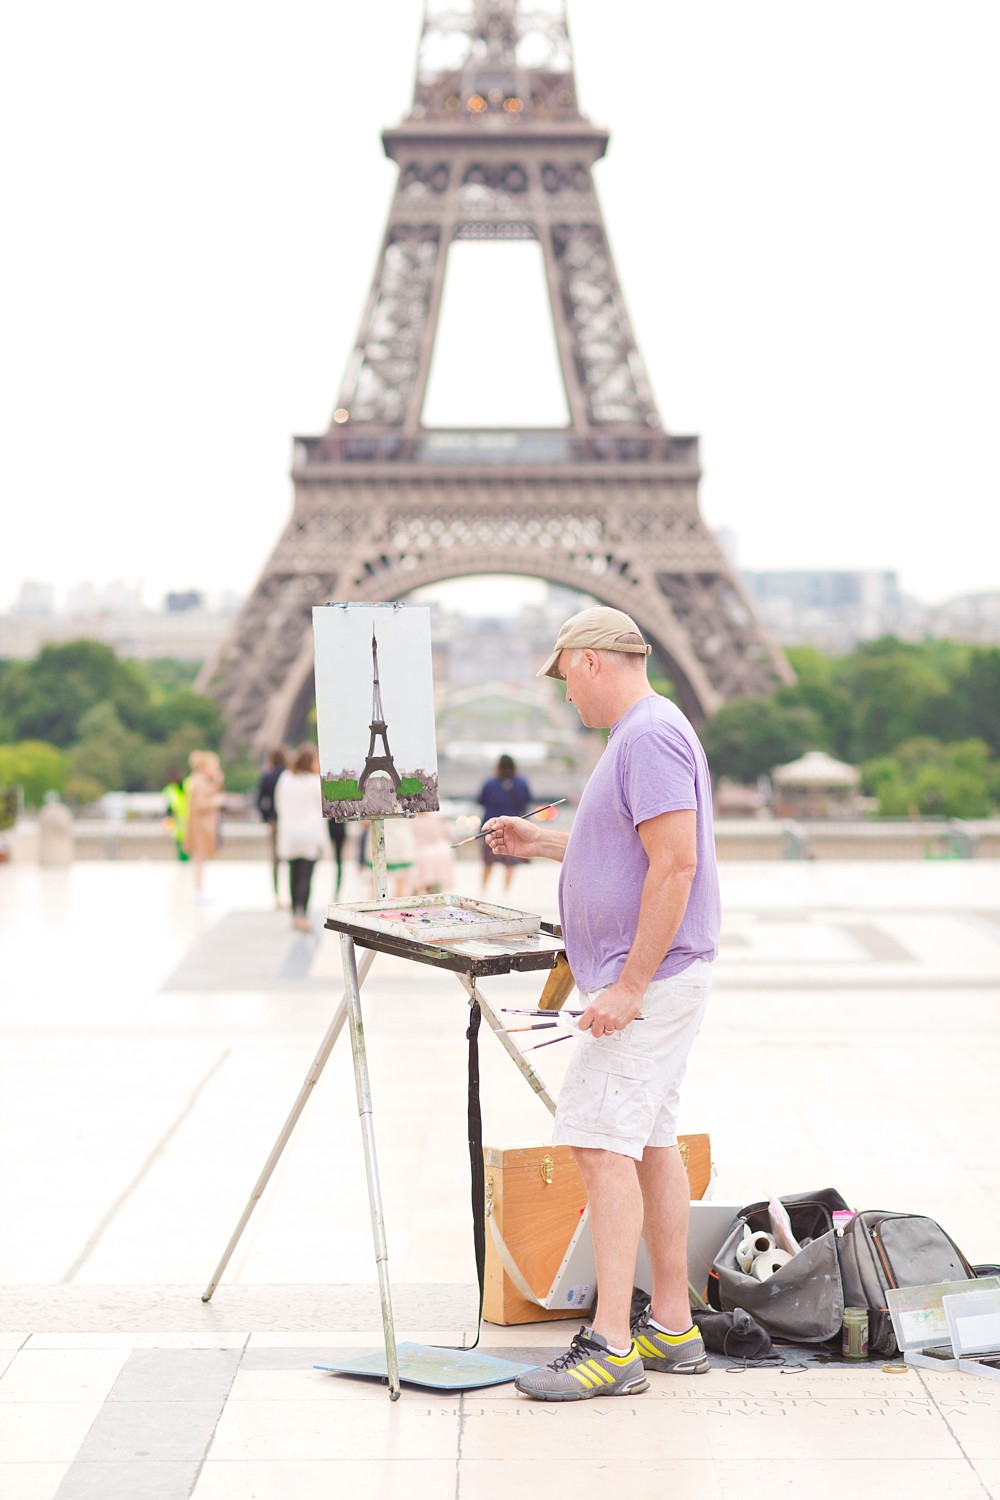 Artist painting at the Eiffel Tower